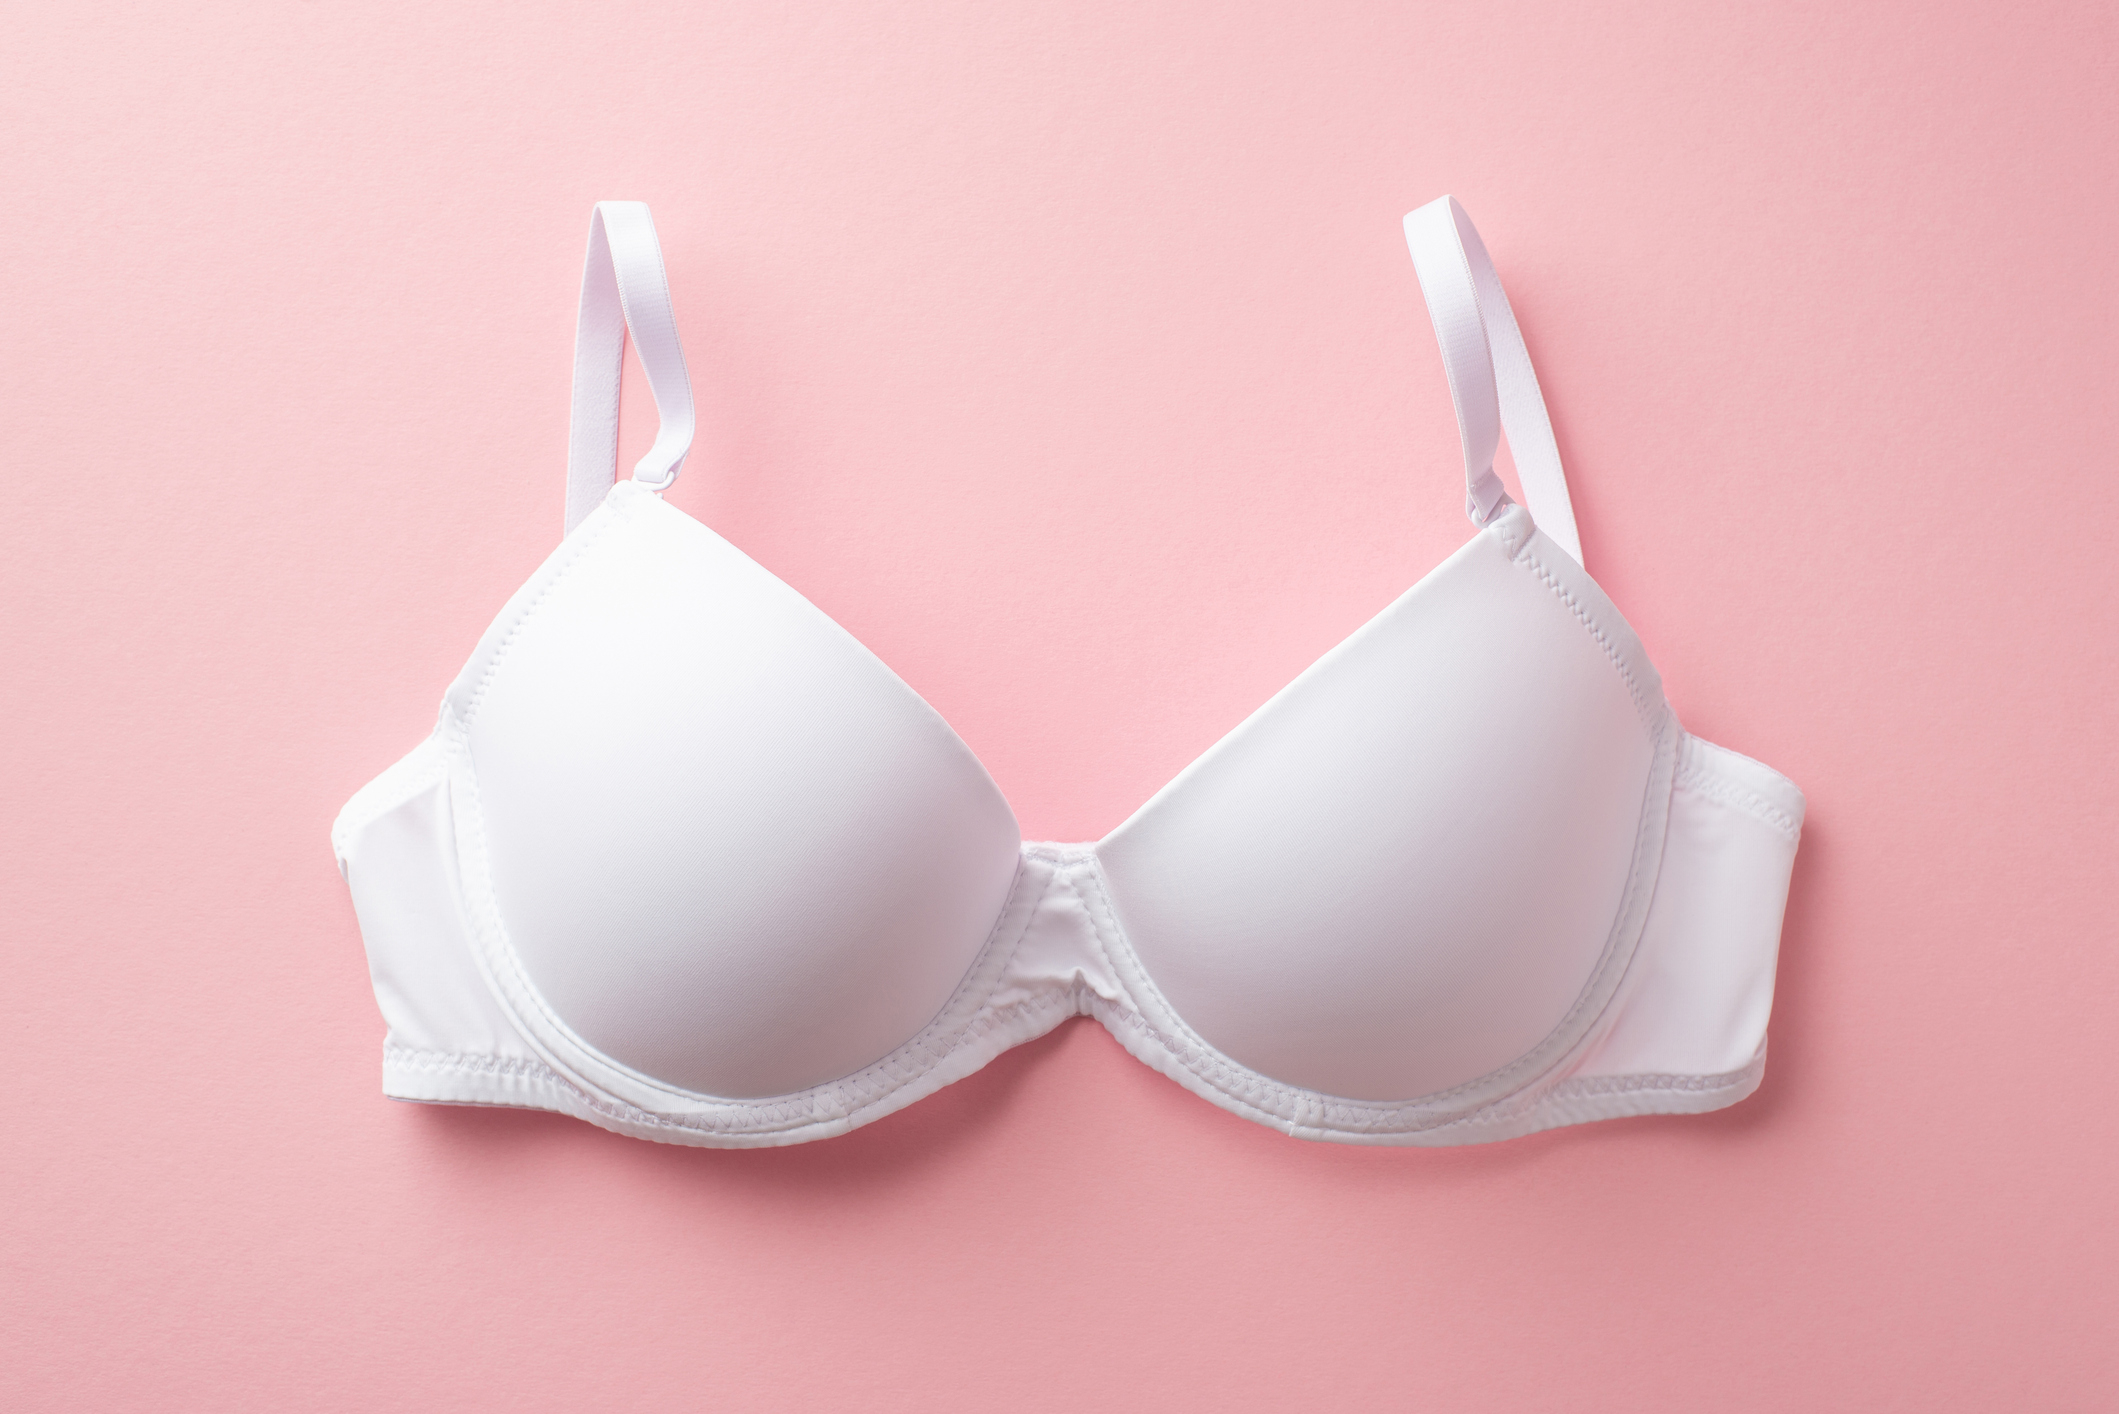 White bra against a pink background, related to a sex and love article topic